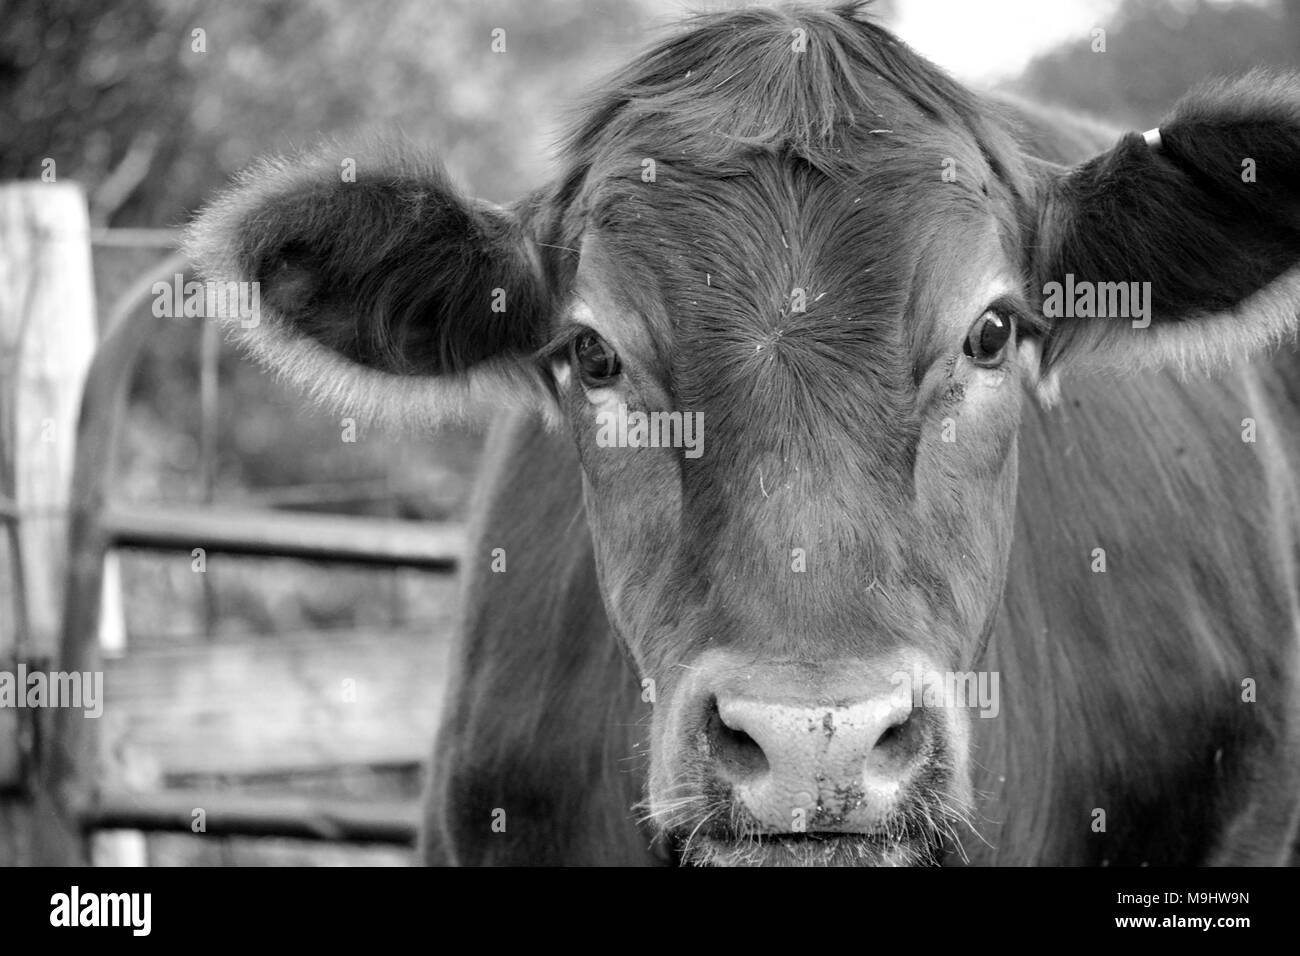 Face or Head of a Red Cow on a farm in Black and white, Iowa Stock Photo